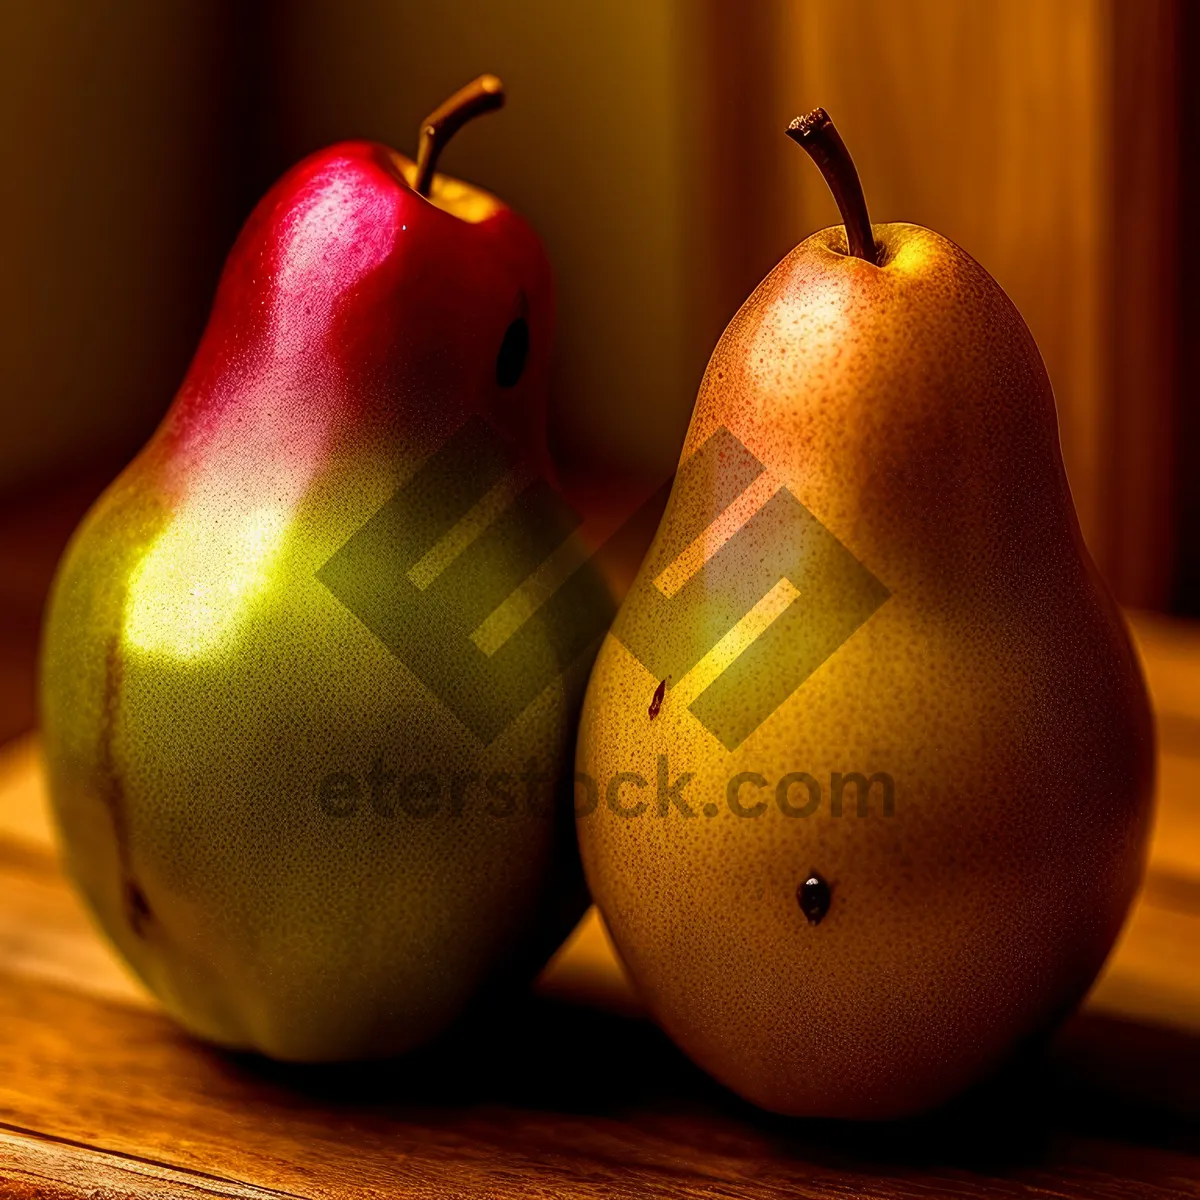 Picture of Ripe, Fresh Anchovy Pear - Juicy, Sweet Edible Fruit